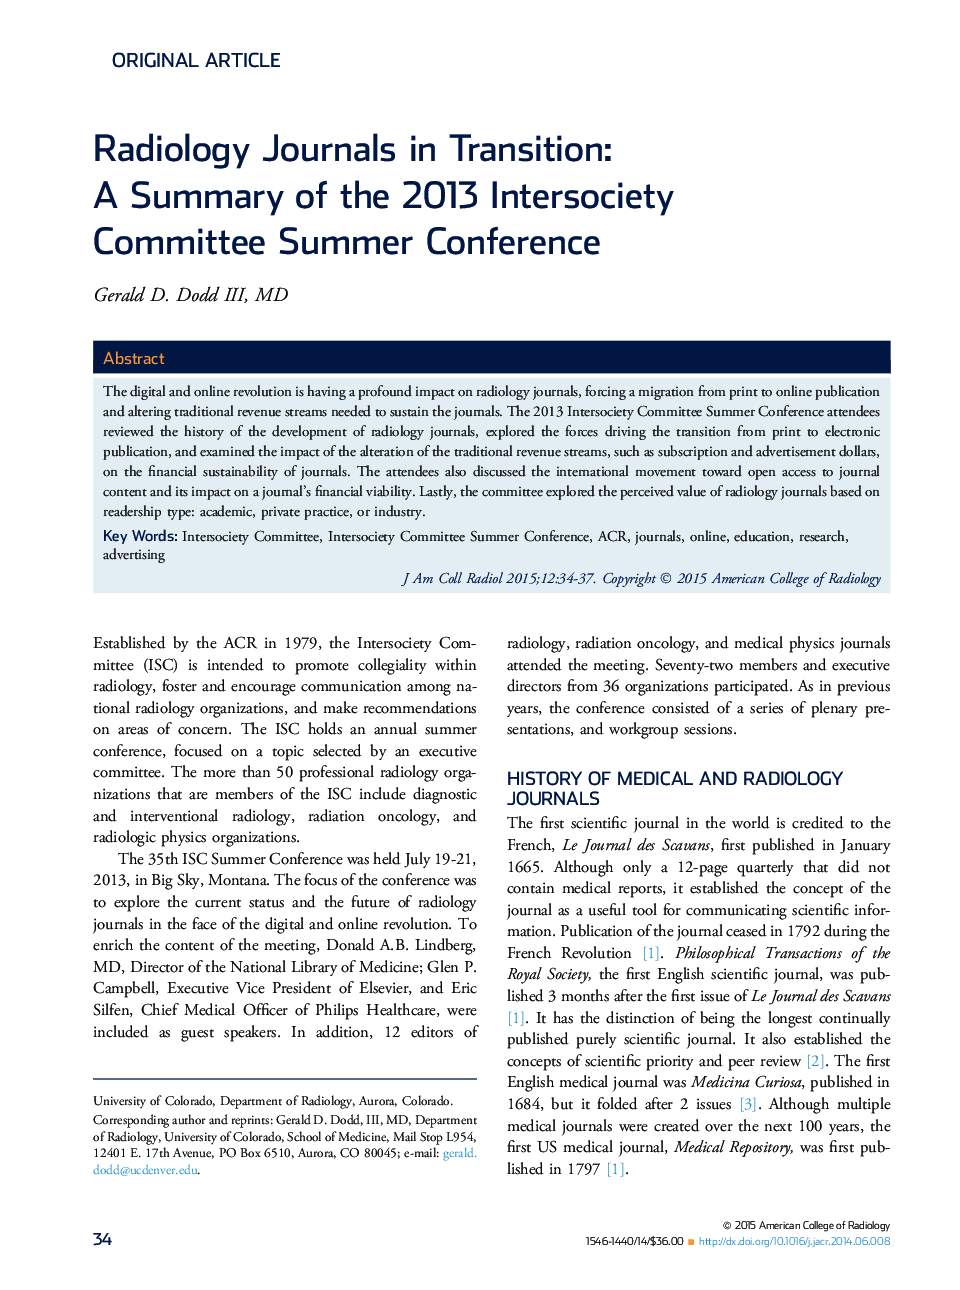 Radiology Journals in Transition: AÂ Summary of the 2013 Intersociety Committee Summer Conference